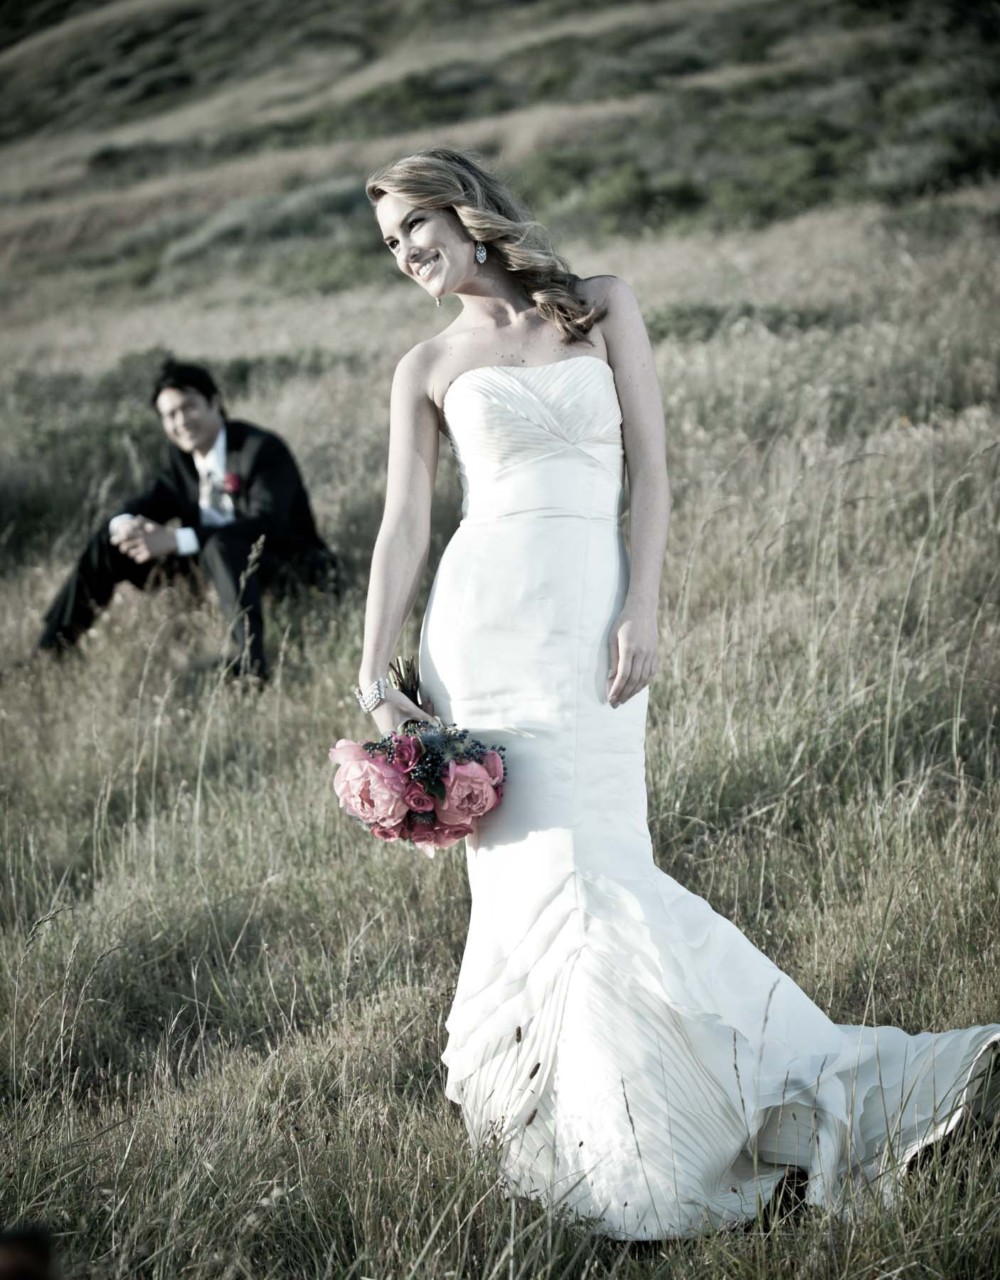 Looking for a professional wedding photographer in Anchorage?